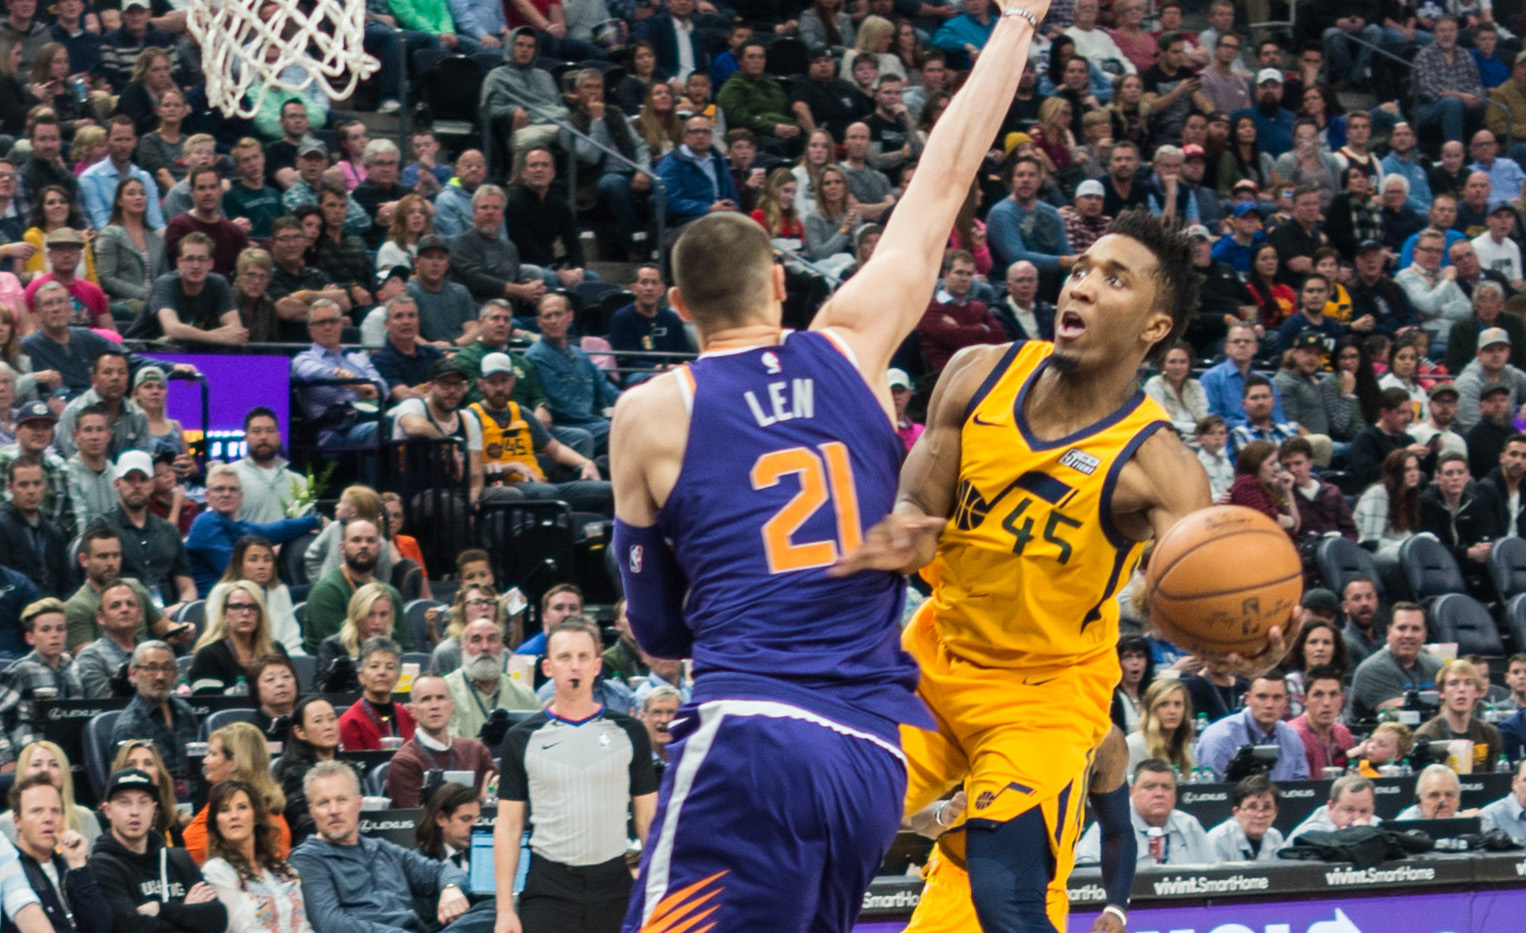 5 Fun Facts about Donovan Mitchell